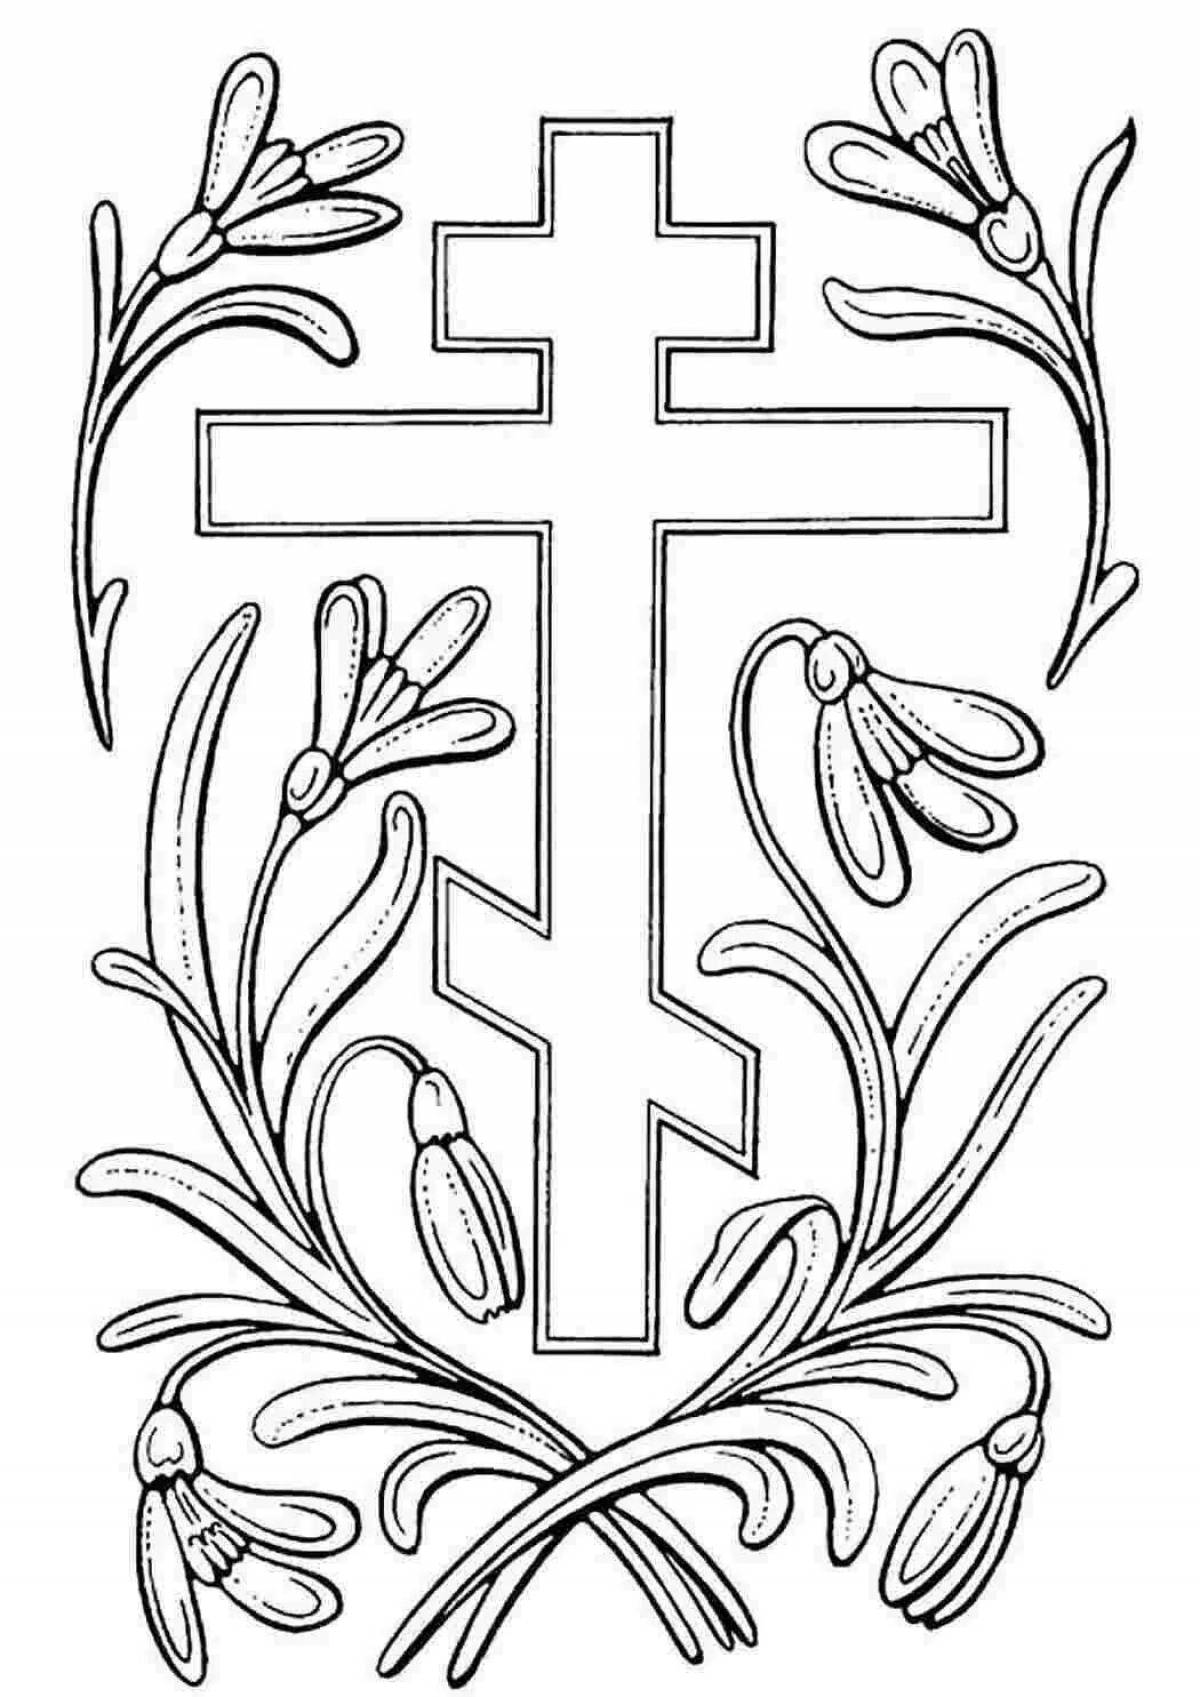 Coloring page graceful church